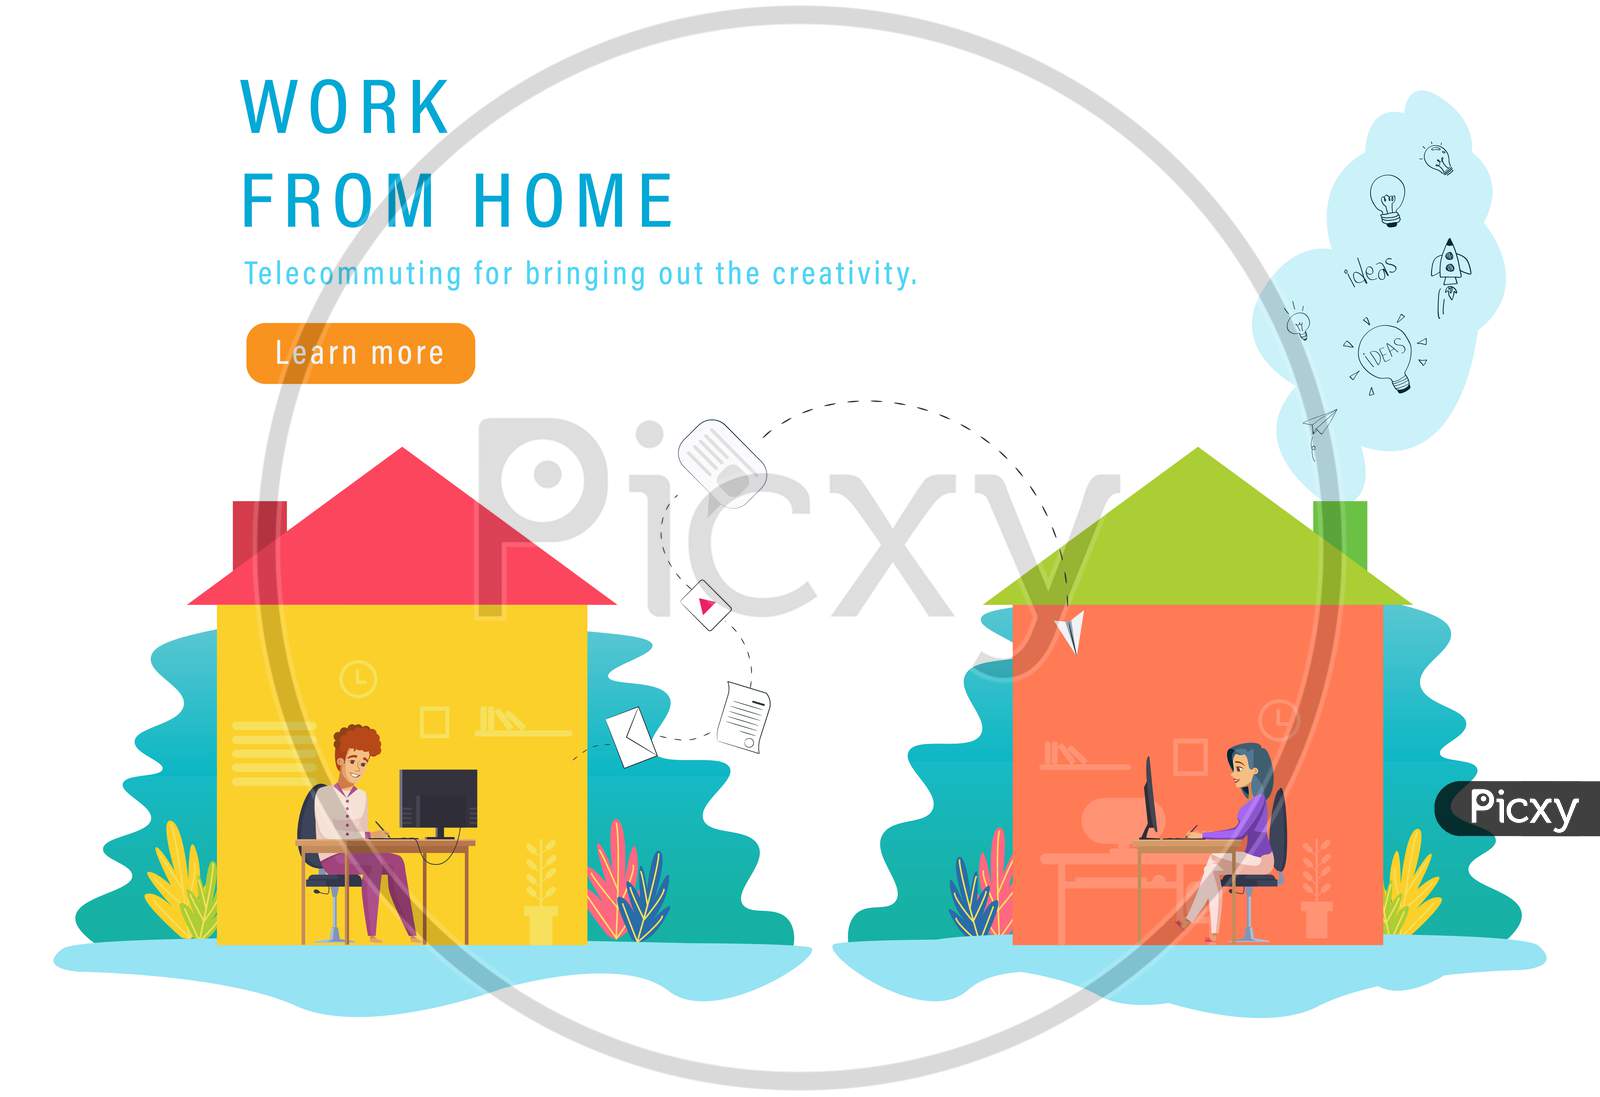 Work From Home, Telecommuting During Coronavirus Pandemic Illustration Vector, Banner Layout For Business And Project